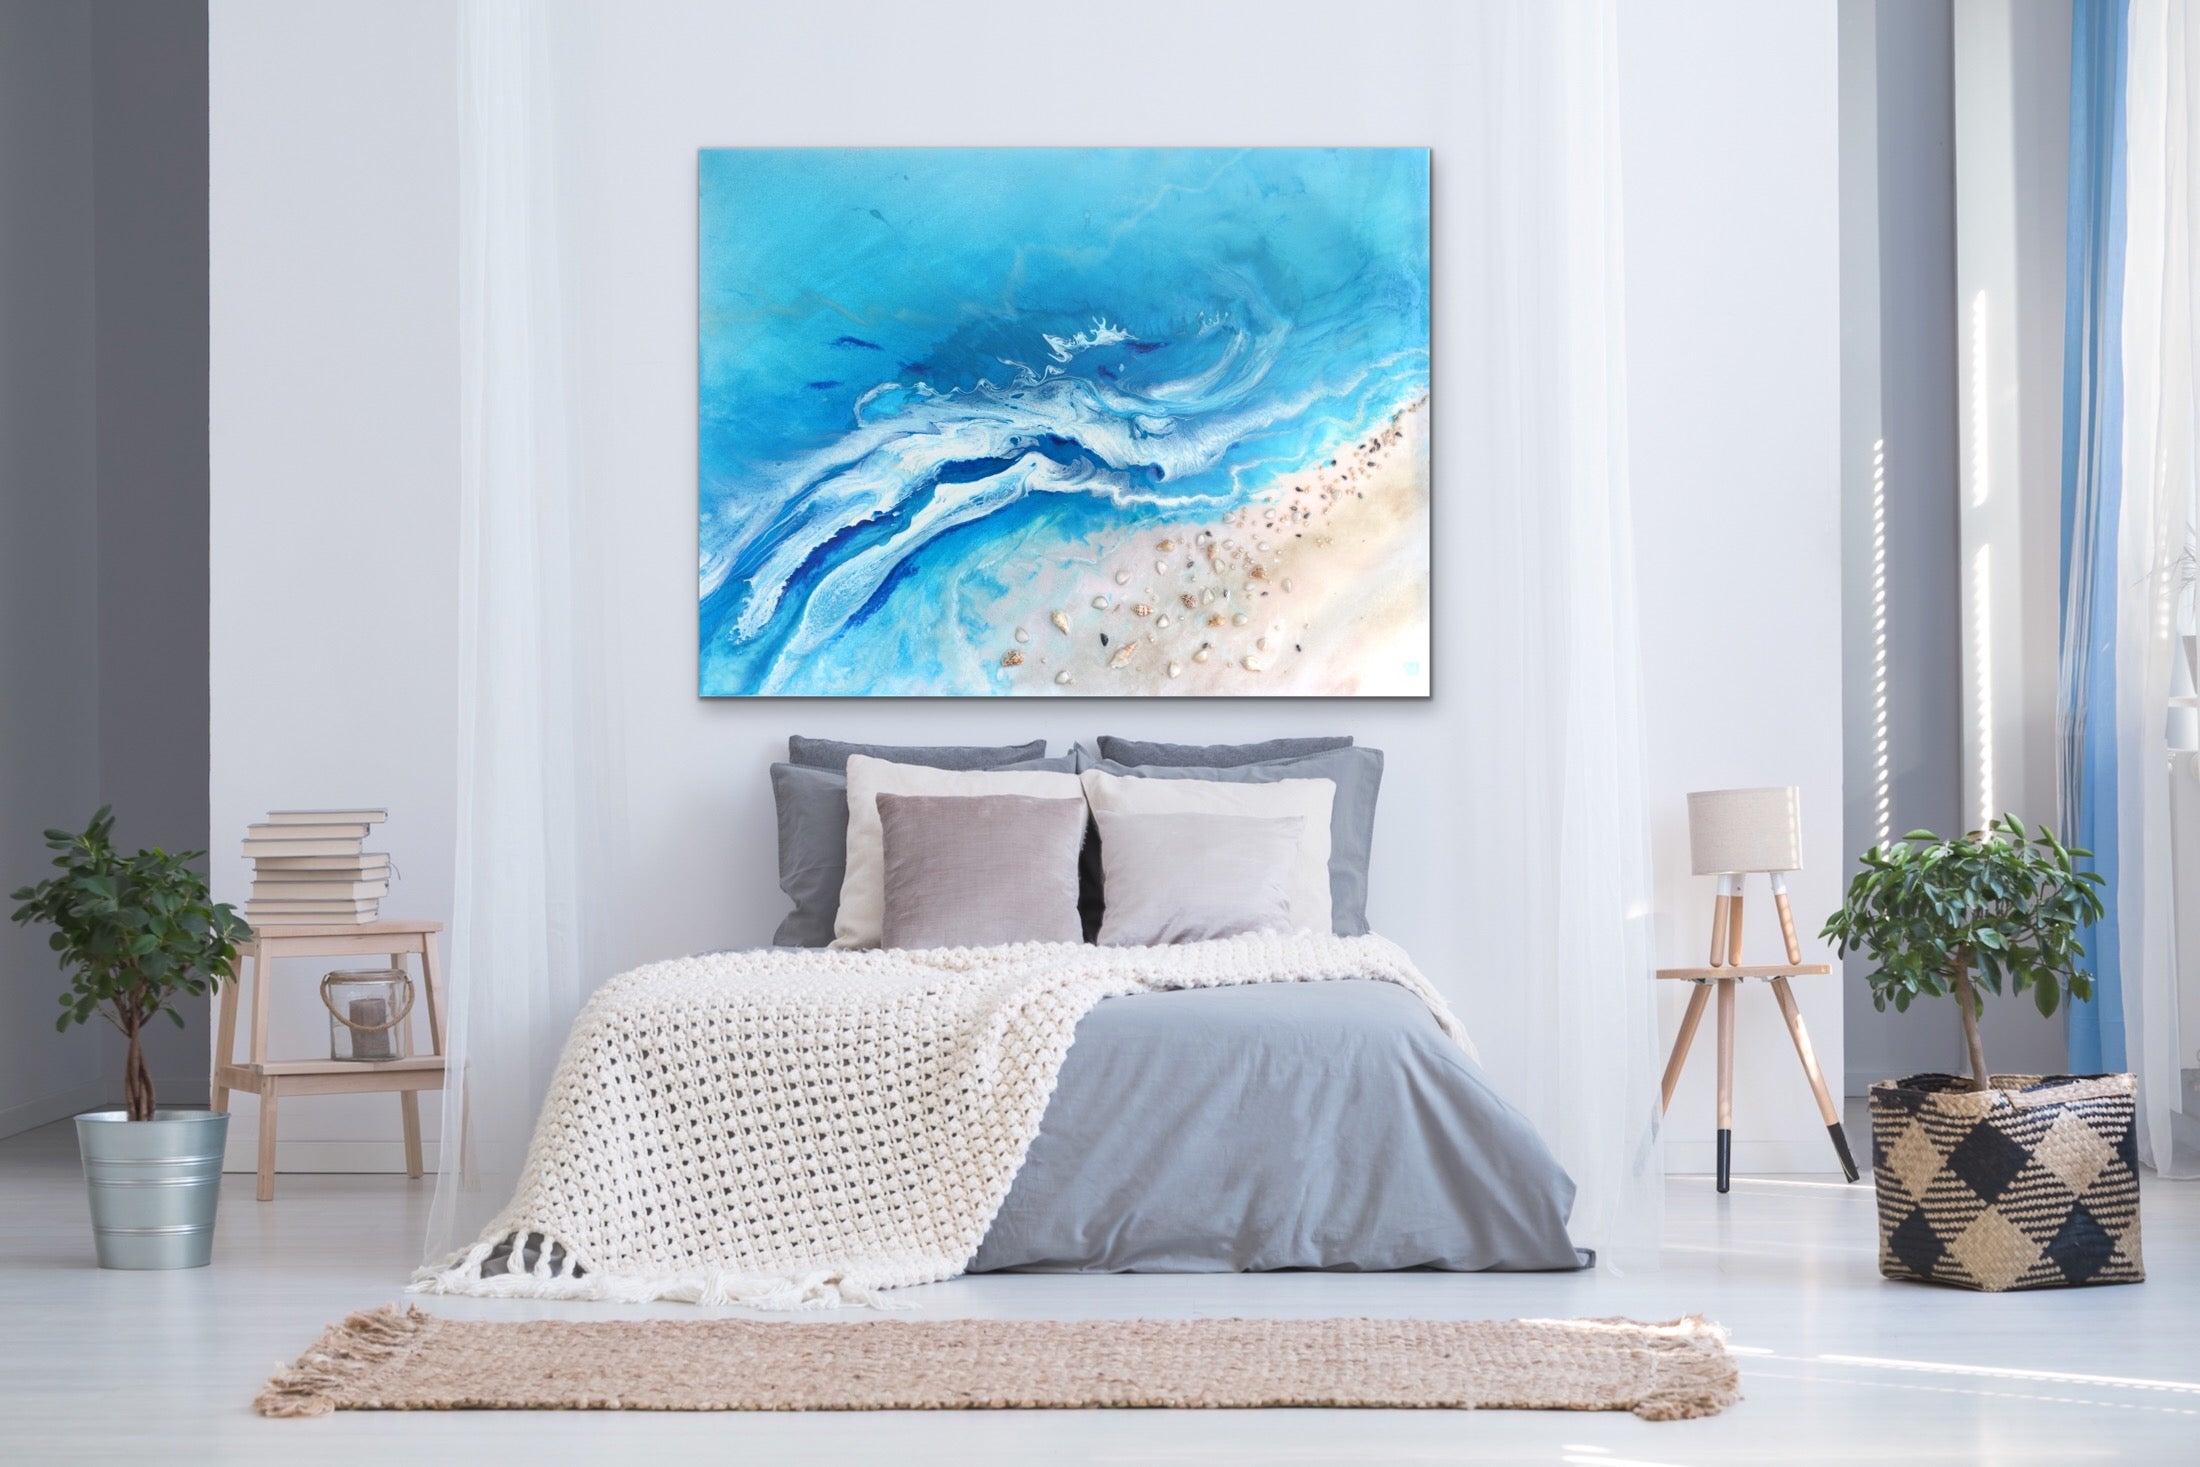 Abstract Seascape. Teal Ocean. Bali Utopia 4. Art Print. Antuanelle Limited Edition Print